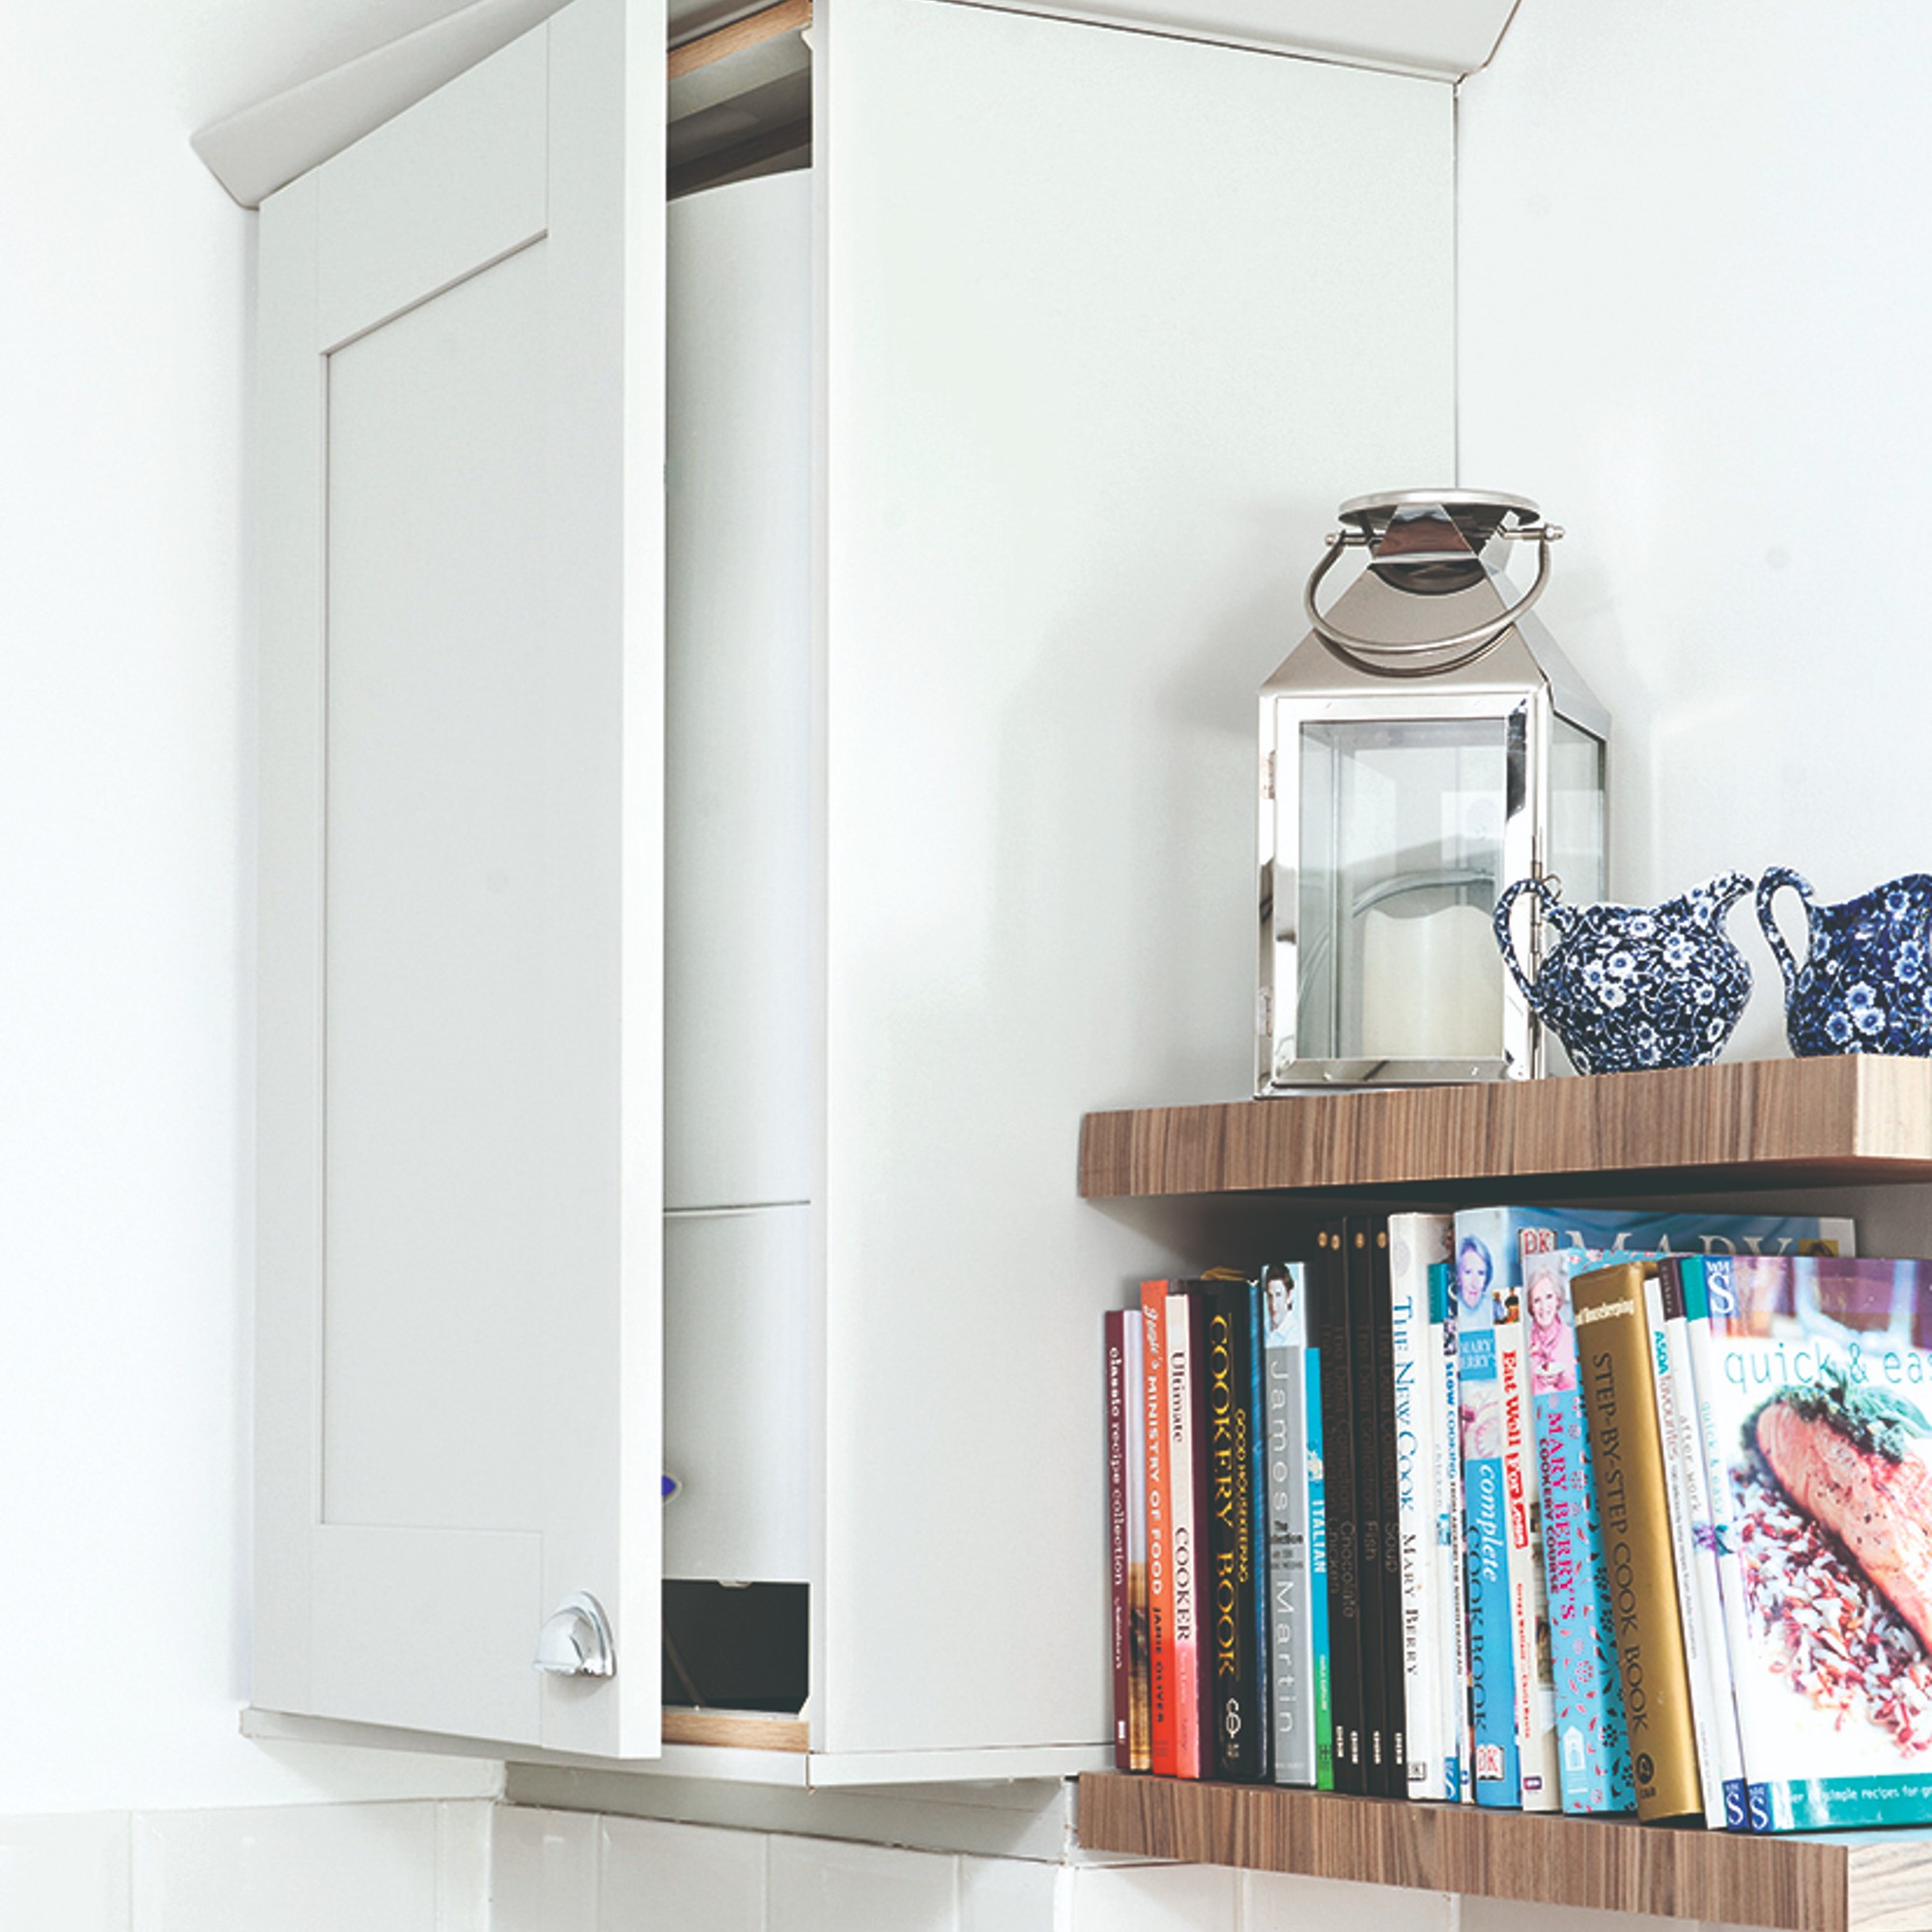 A kitchen with a boiler cupboard and bookshelves